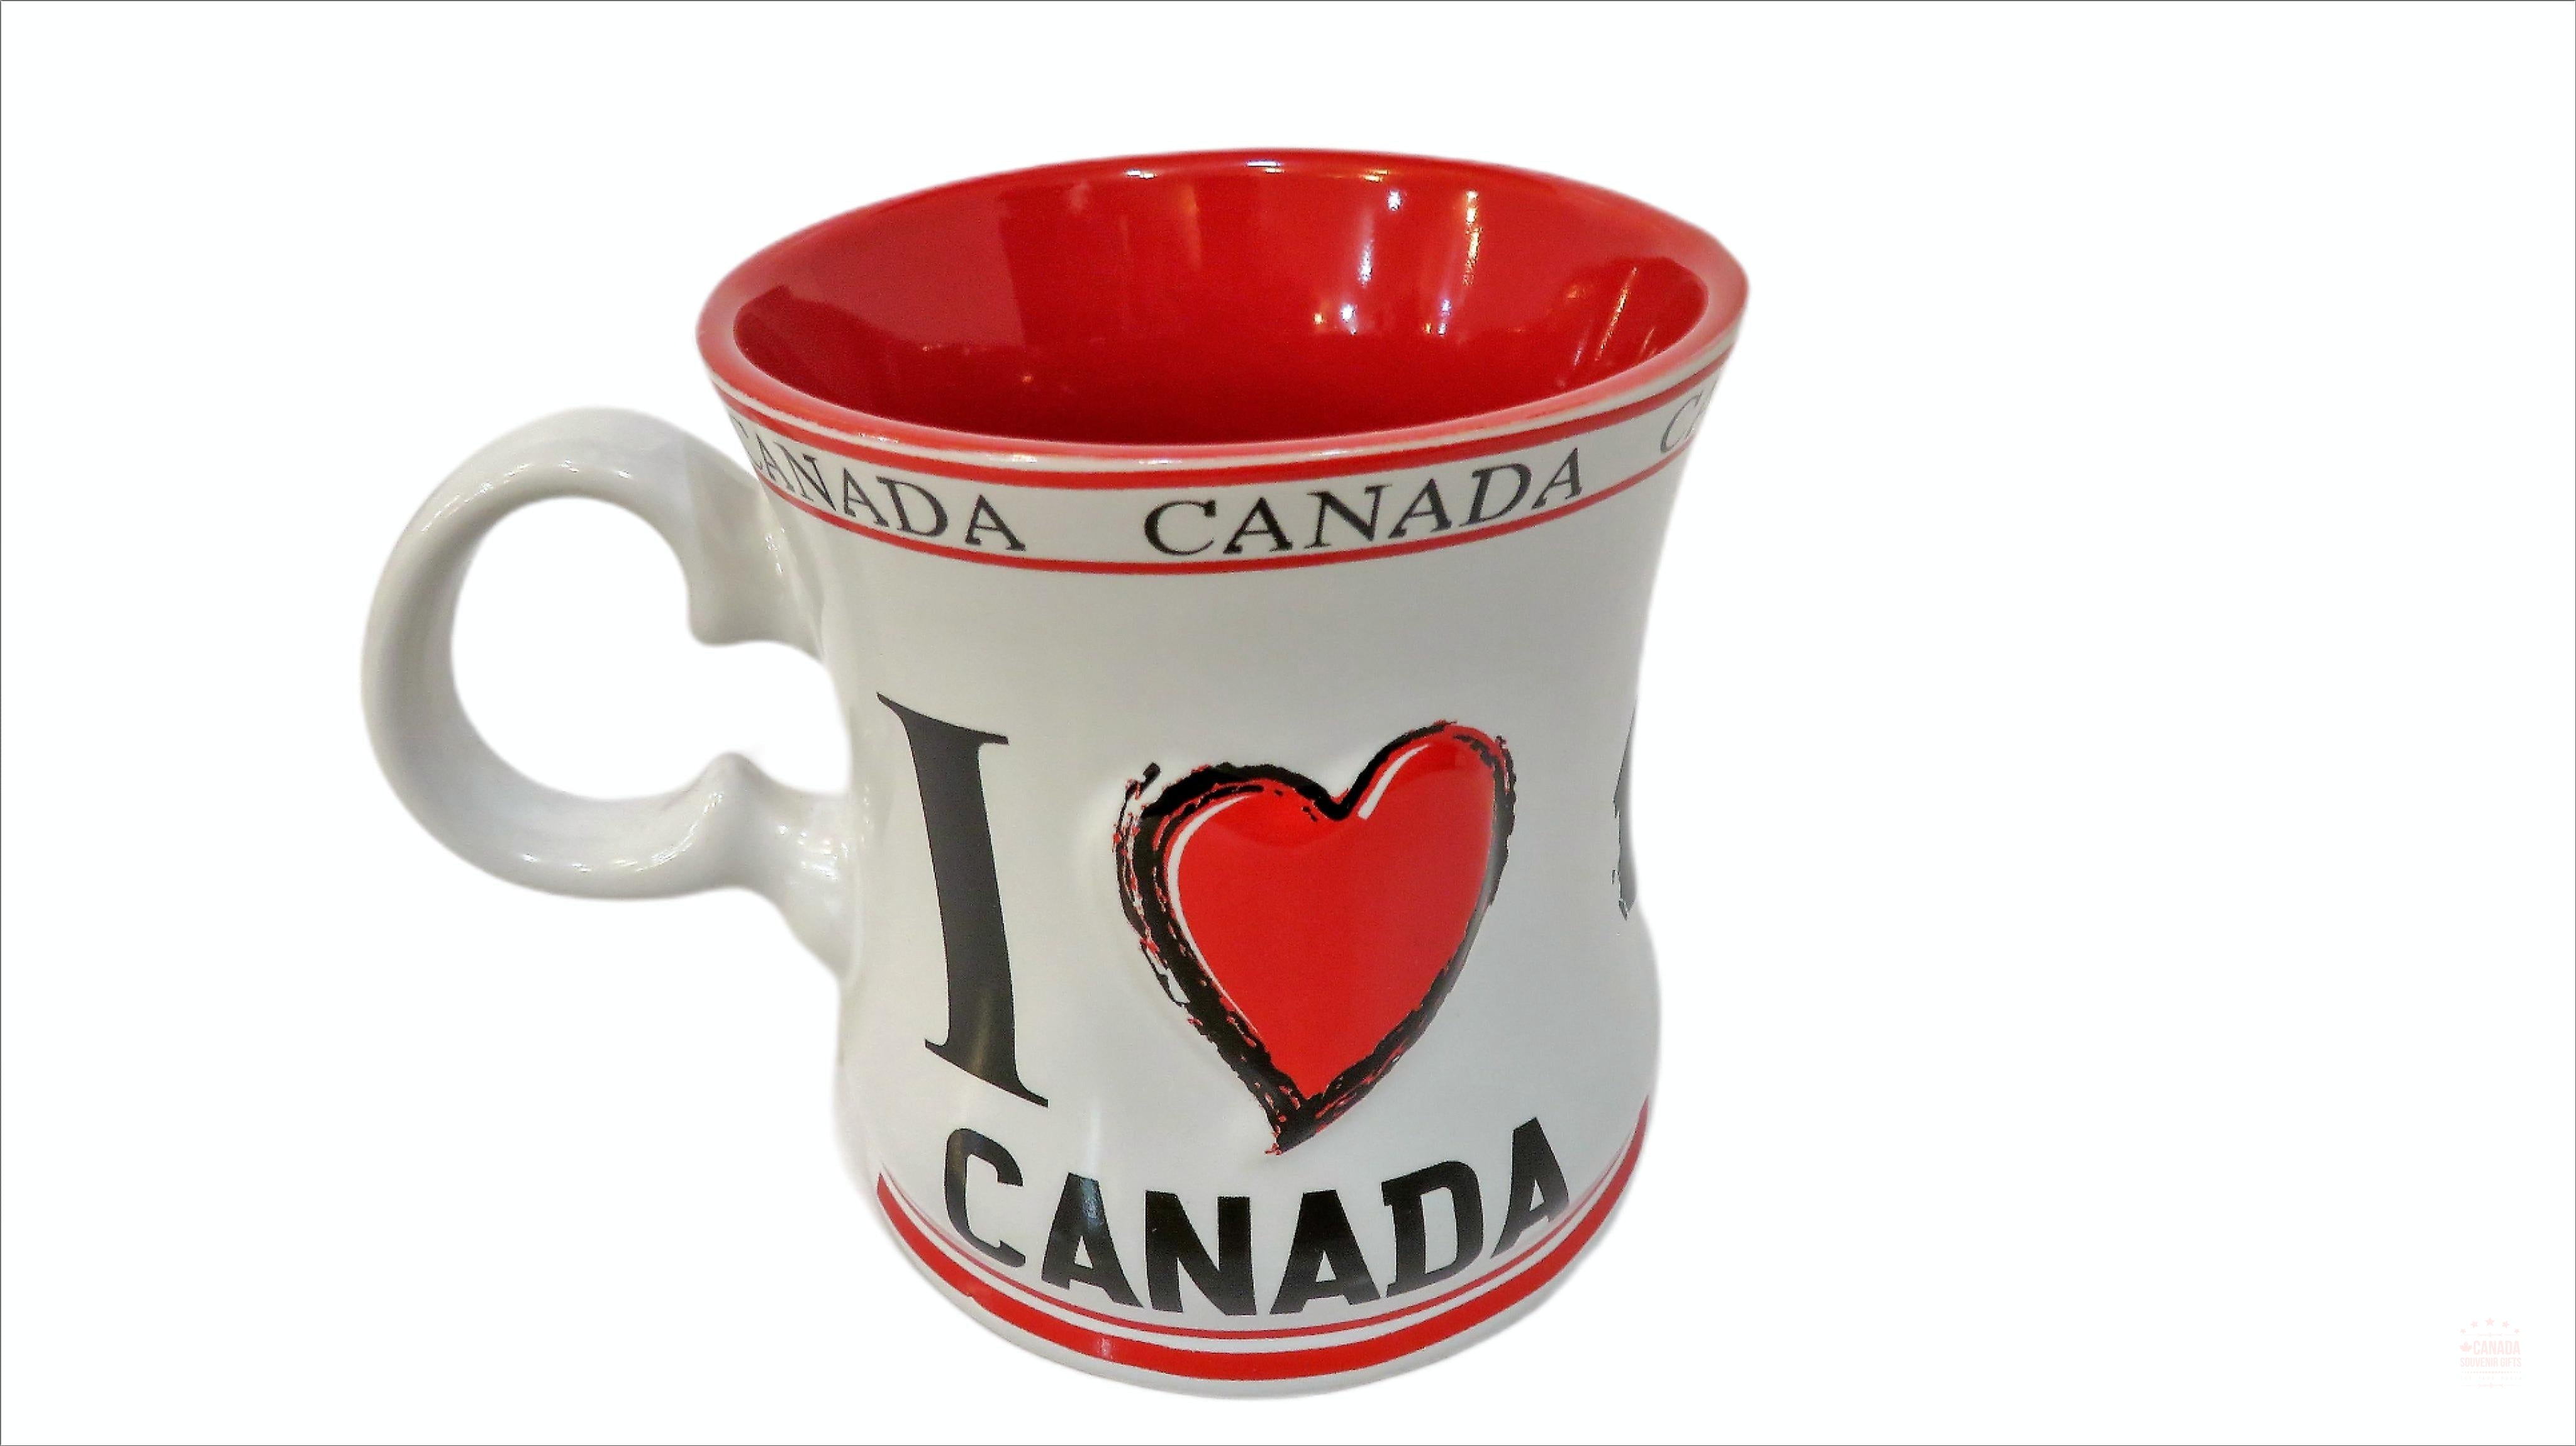 Canada Flag & Map of Canada Ceramic Coffee Mug | Cider, Hot Chocolate, Tea Cup for Camping, Traveling | Perfect Gift for Your Loved one